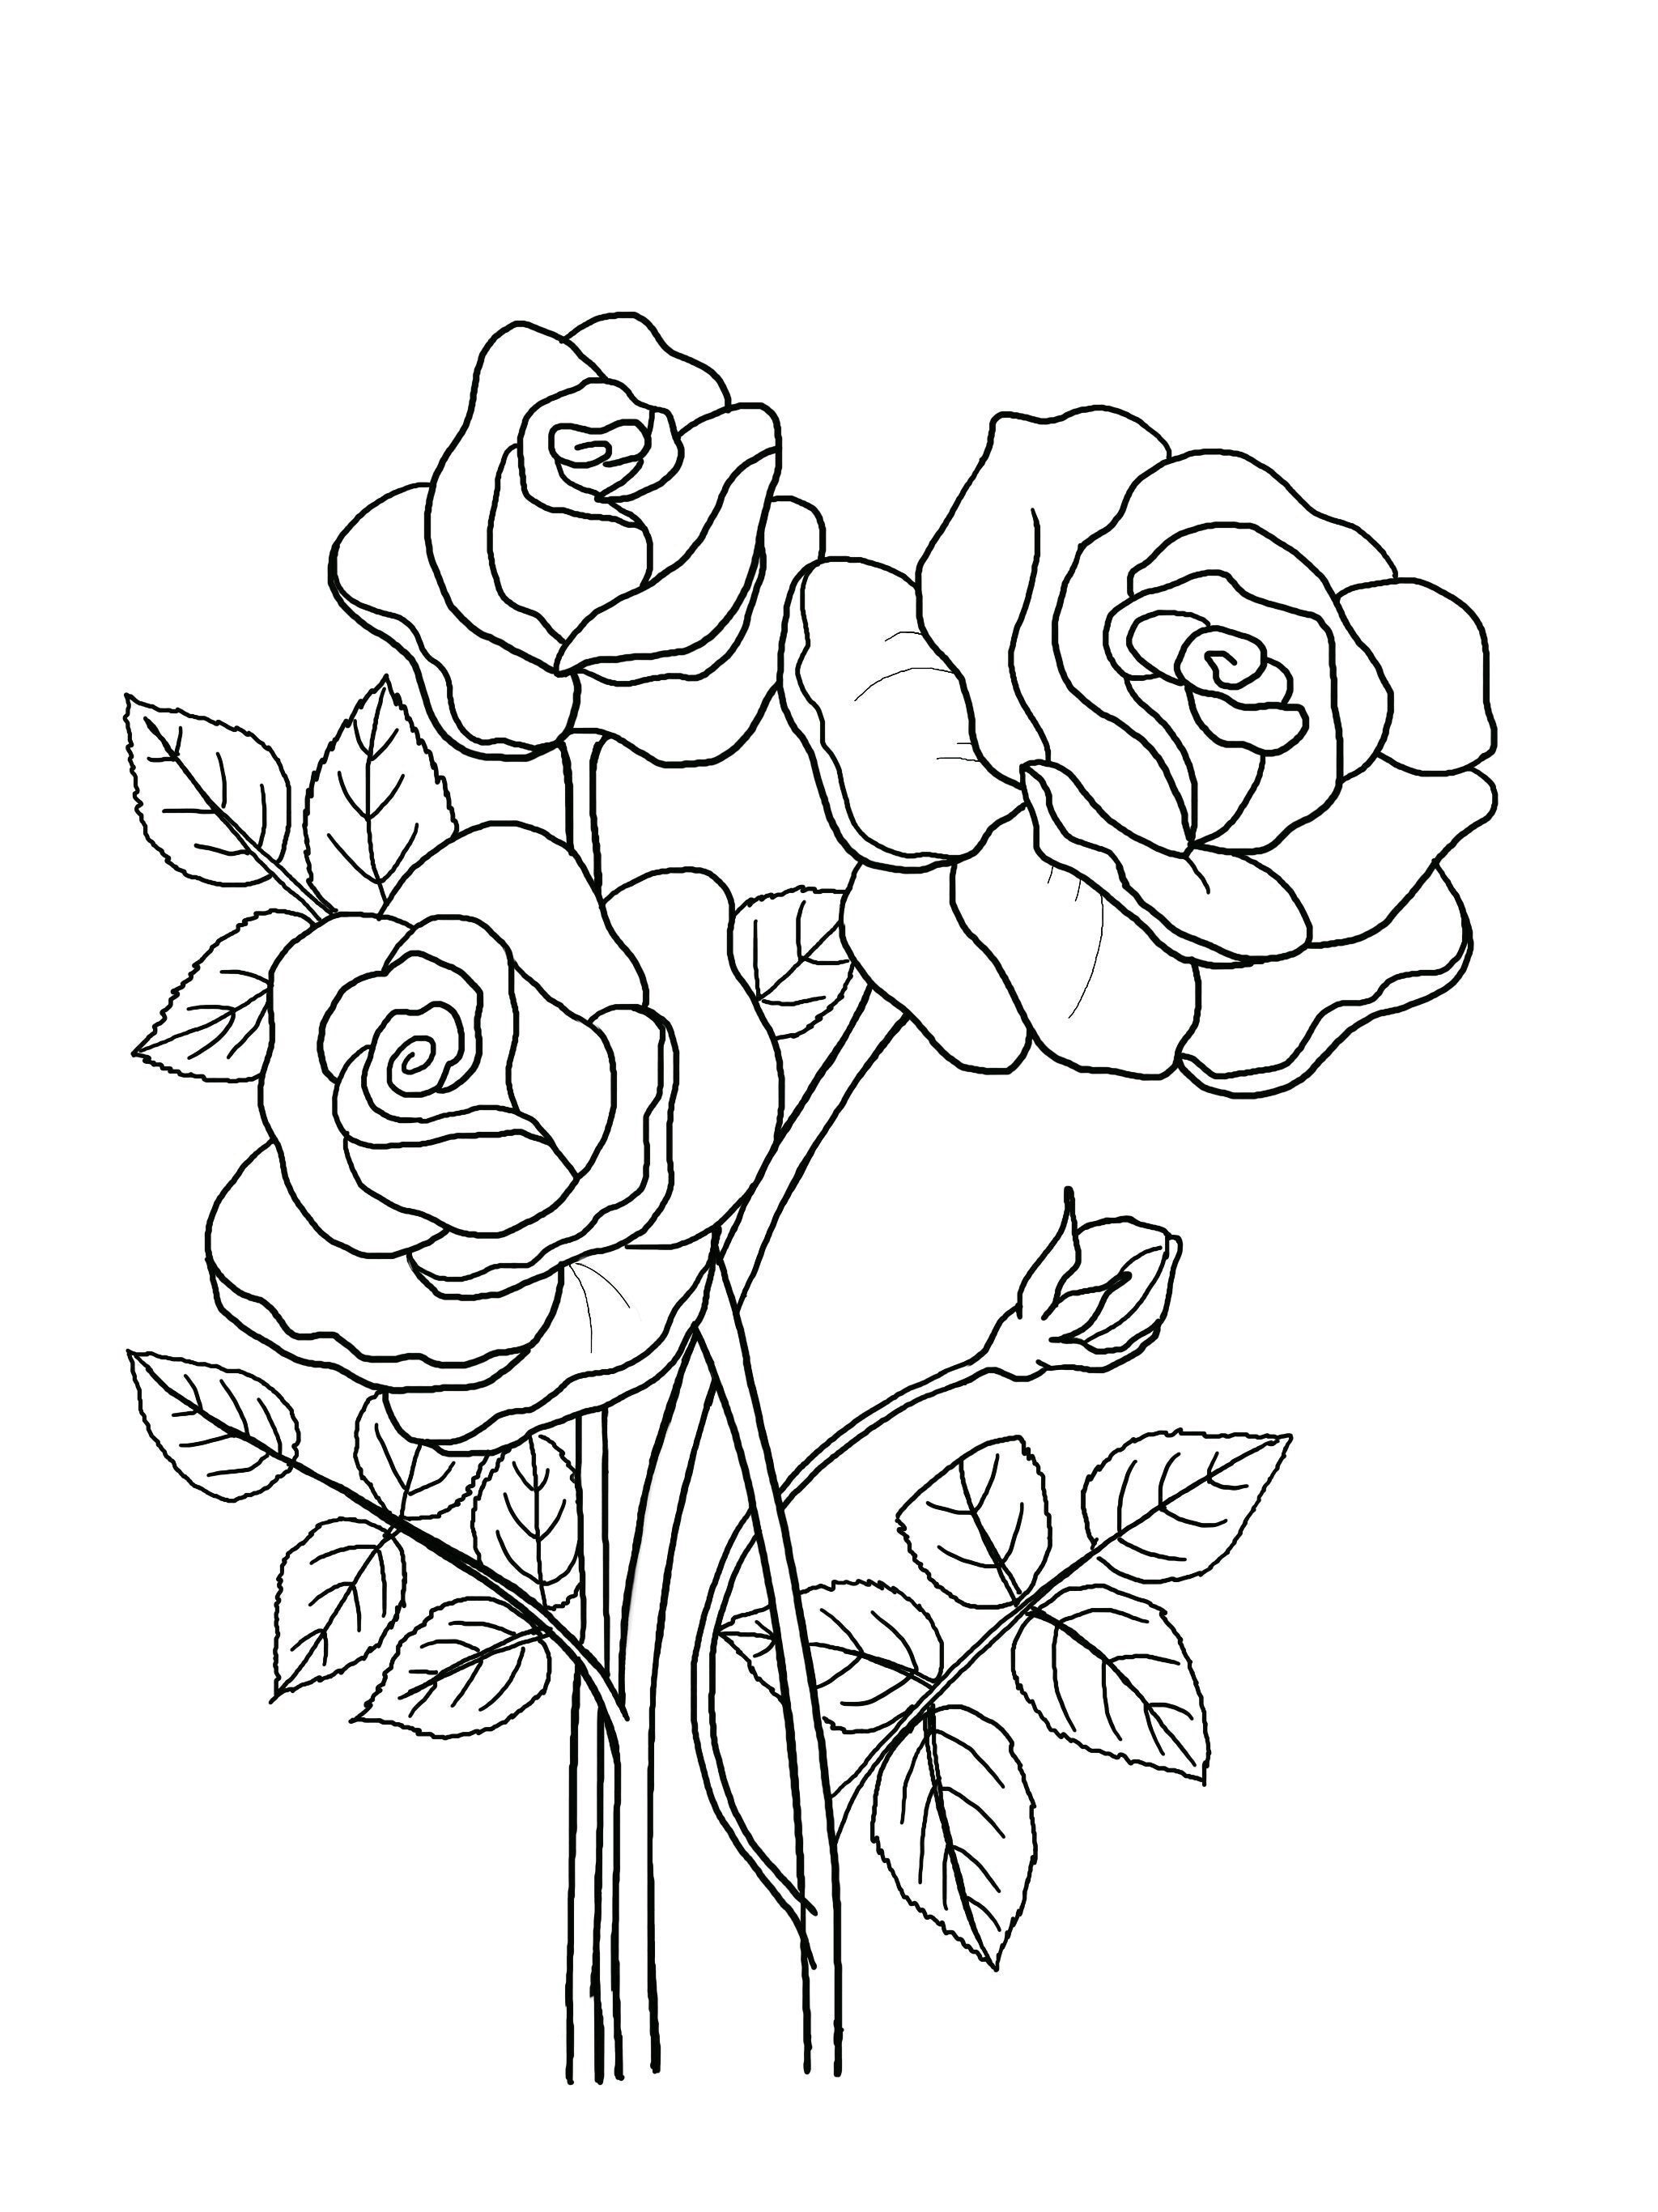 Printable floral coloring sheets coloring pages adult coloring pages kids coloring pages coloring flowers